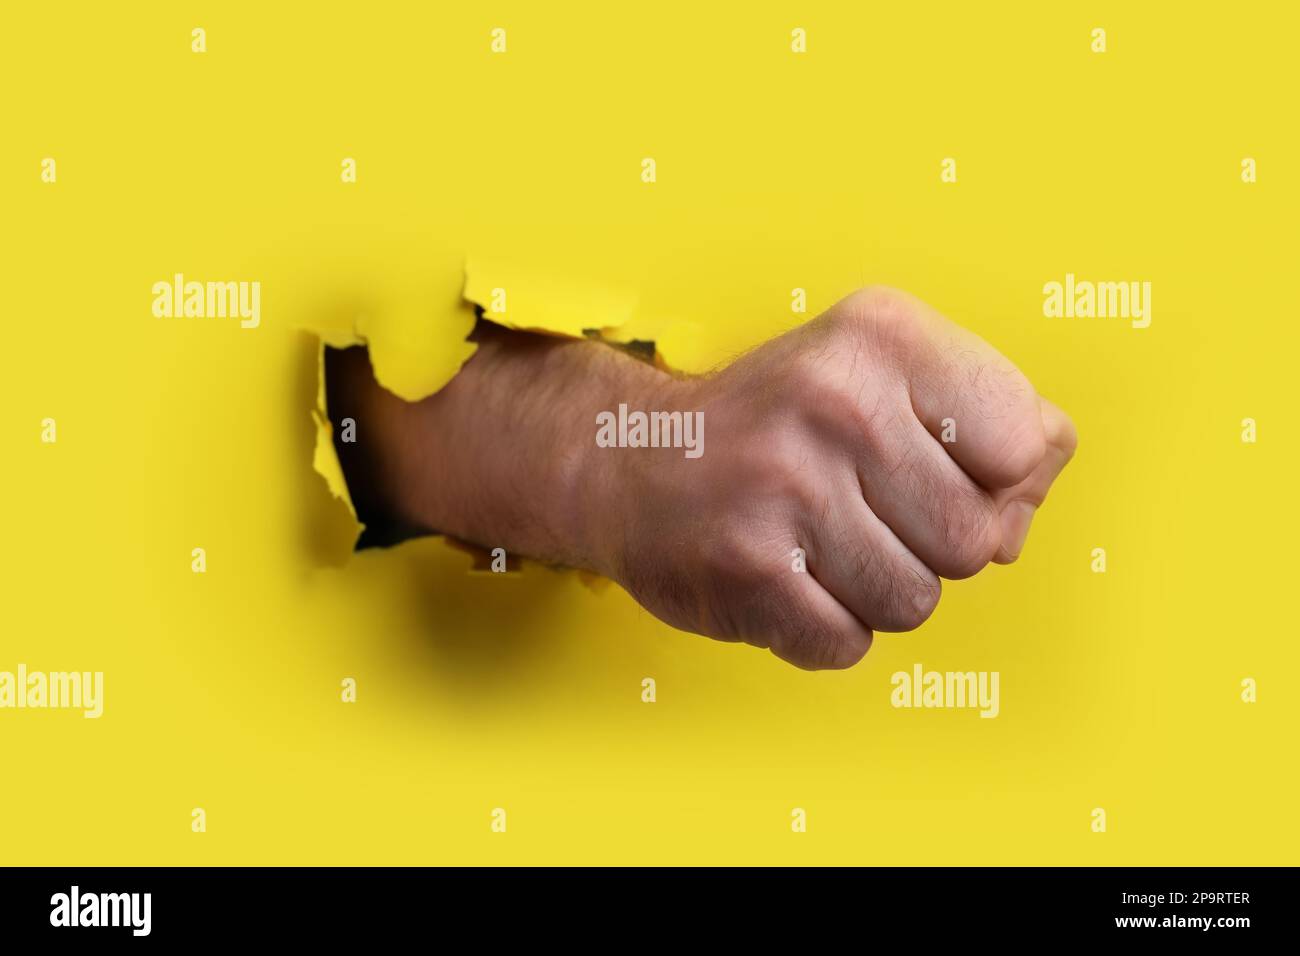 Man breaking through yellow paper with fist, closeup Stock Photo